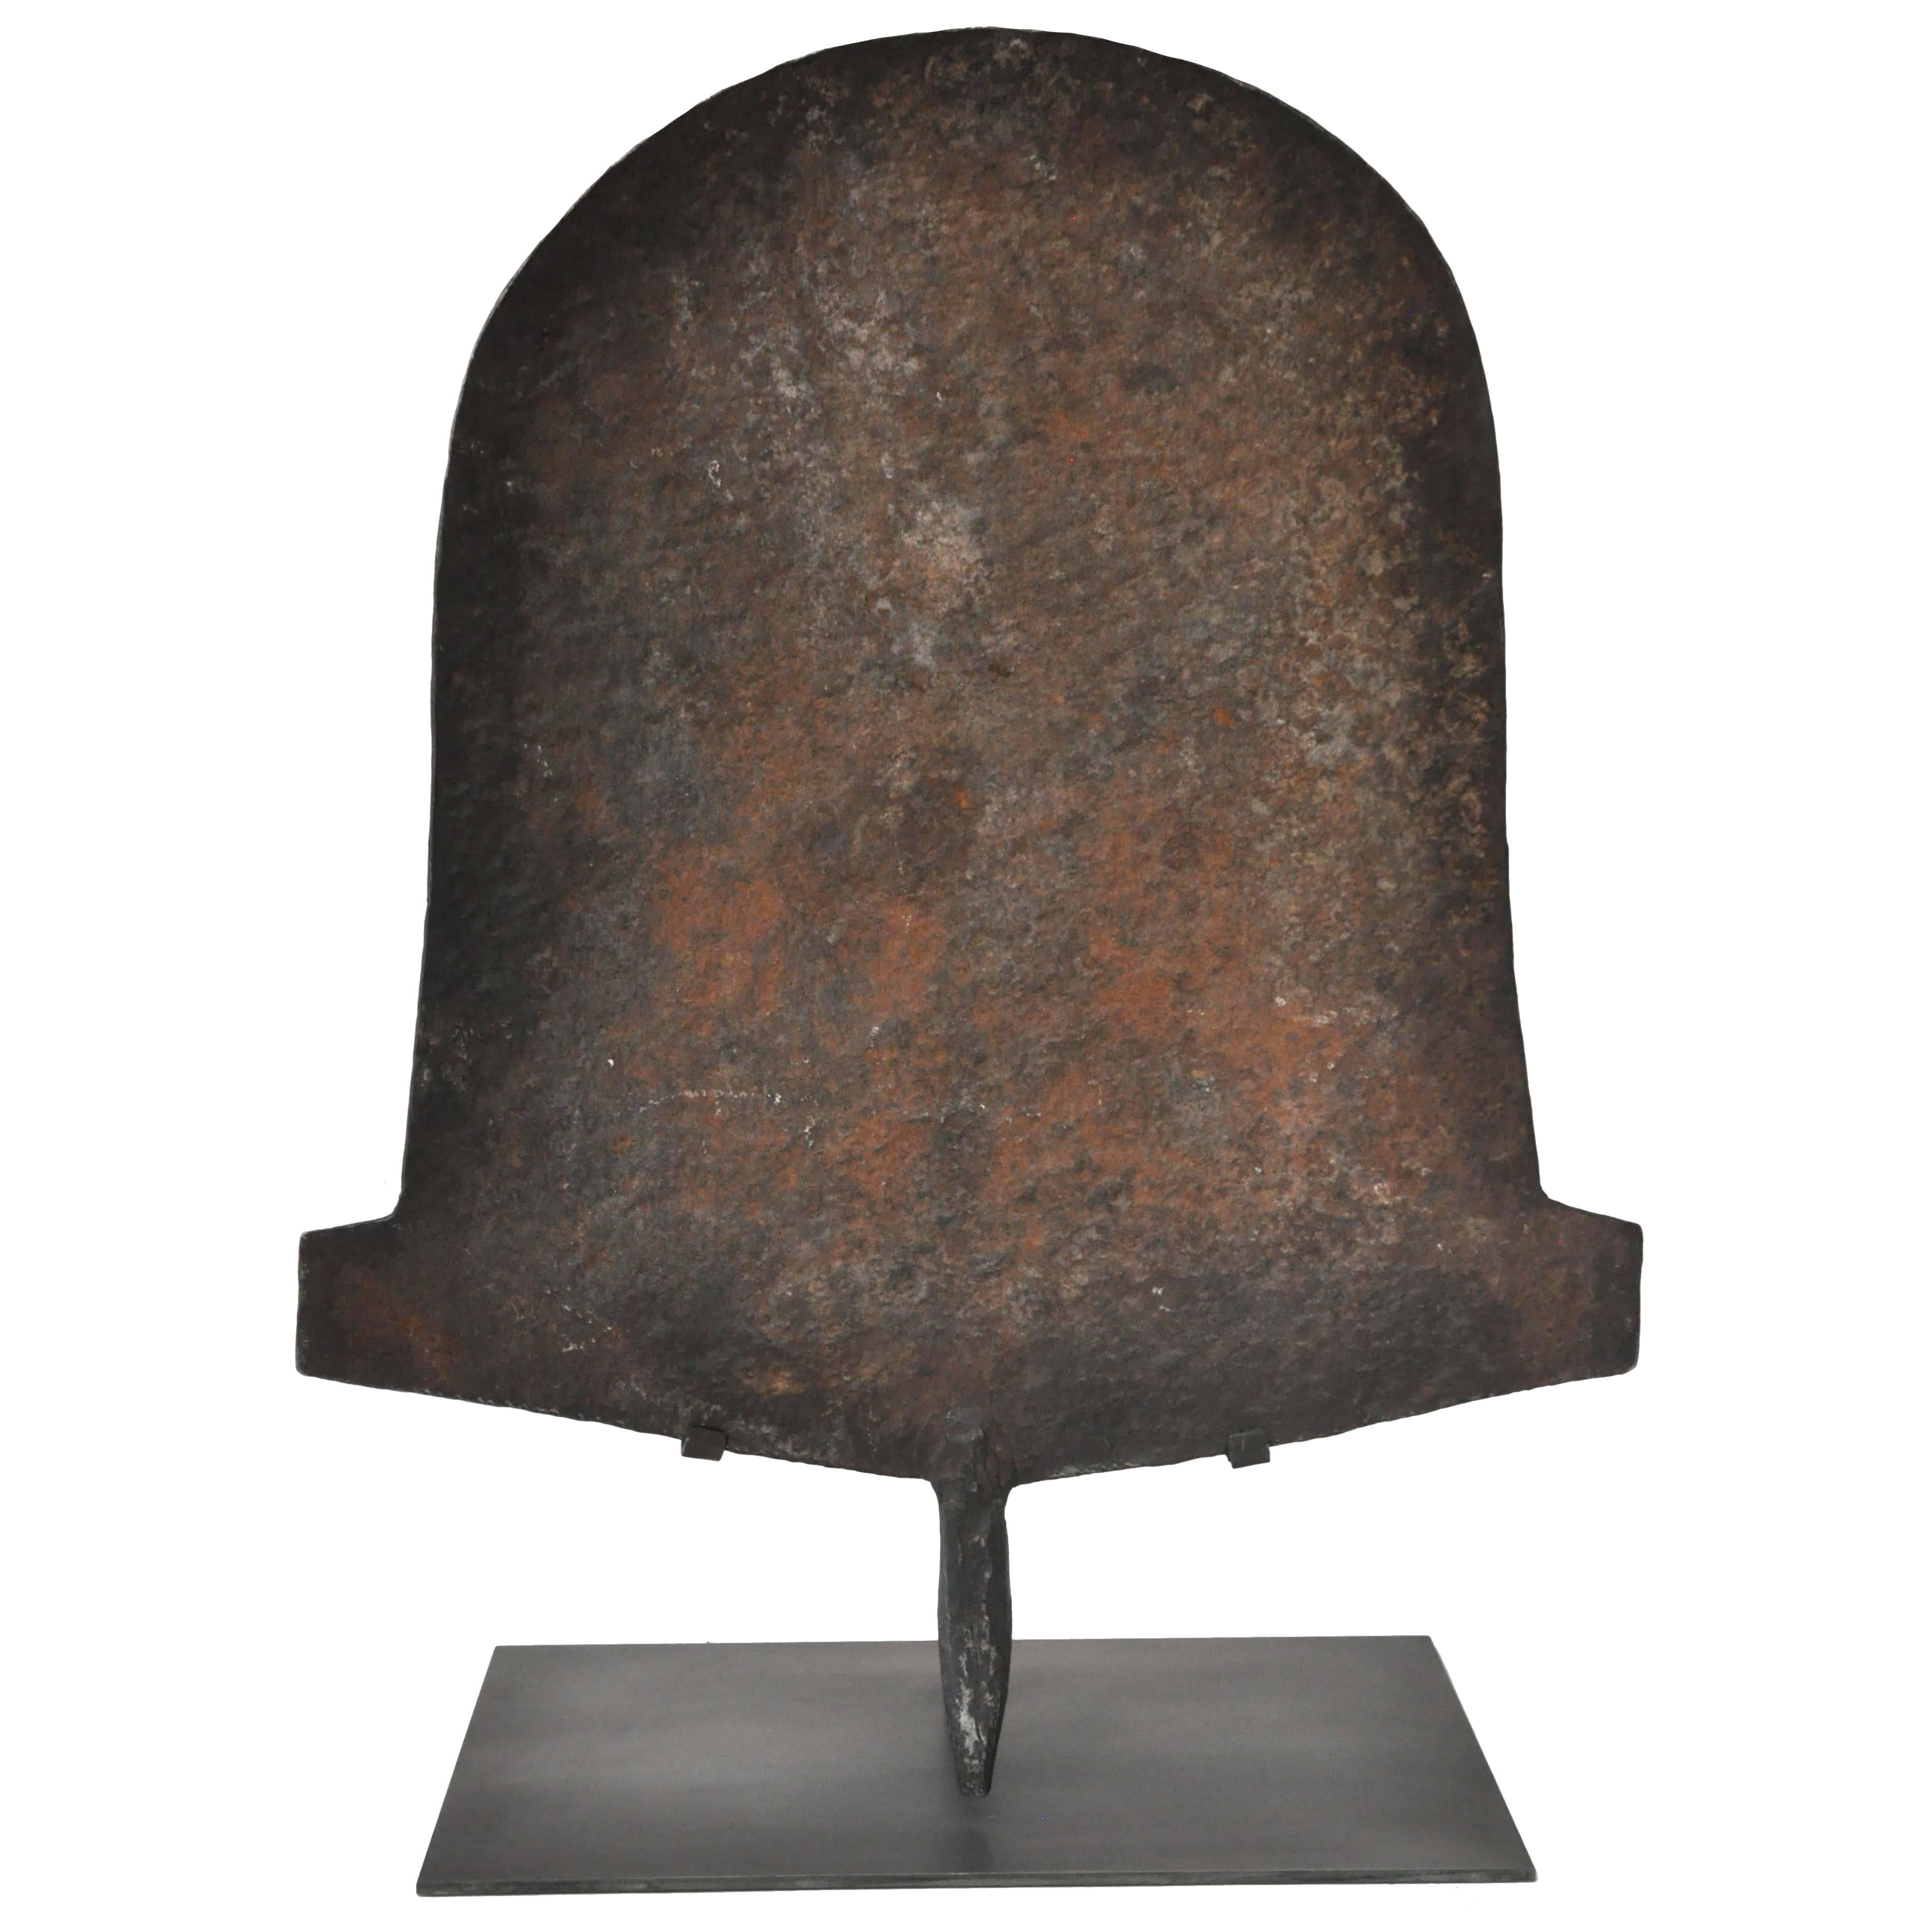  Early 19th Century Nigerian Iron Shield/Currency For Sale